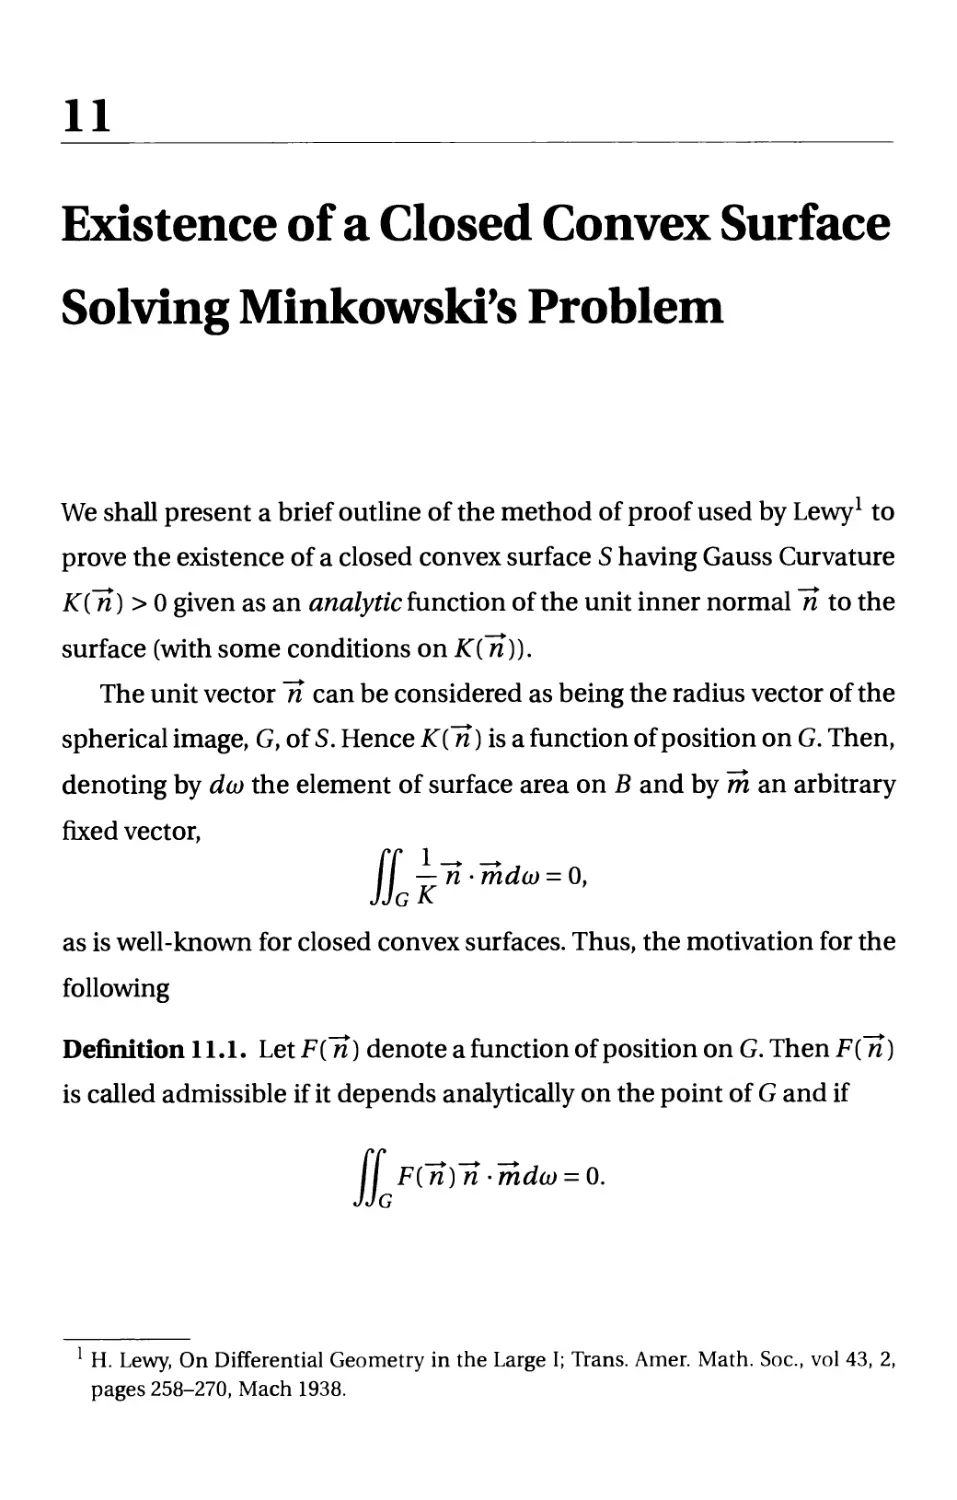 11. Existence of a Closed Convex Surface Solving Minkowski's Problem